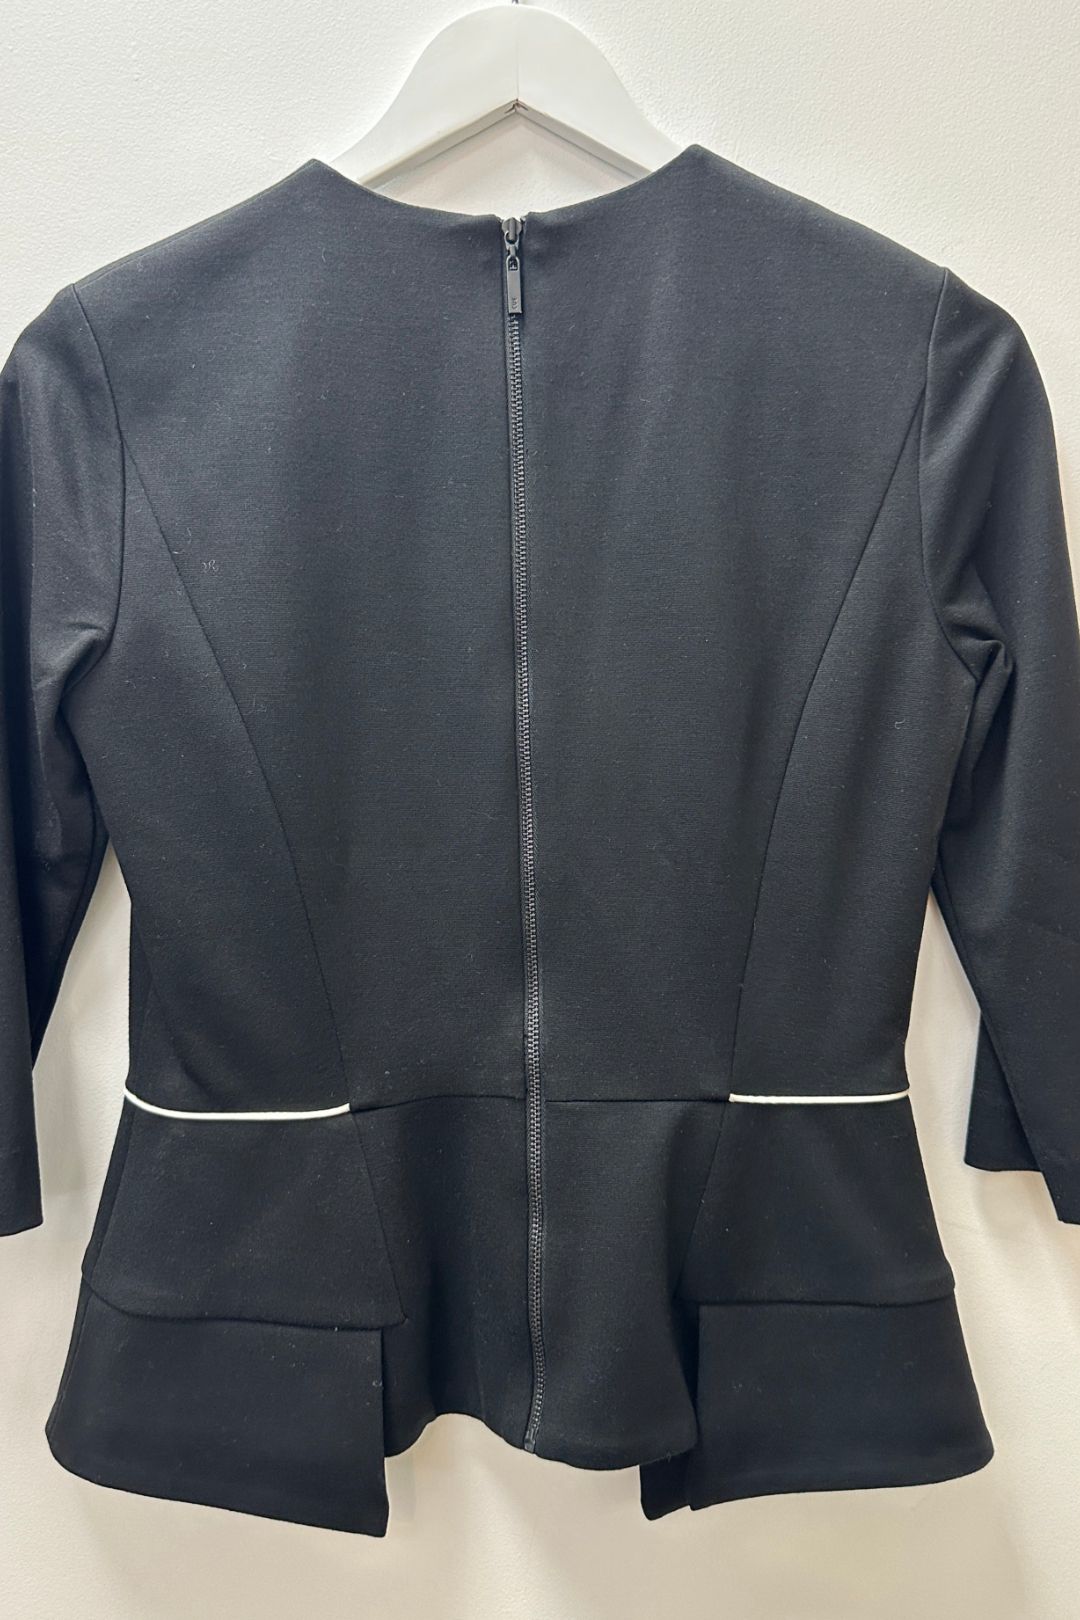 Cue Black Suit Top with White Piping